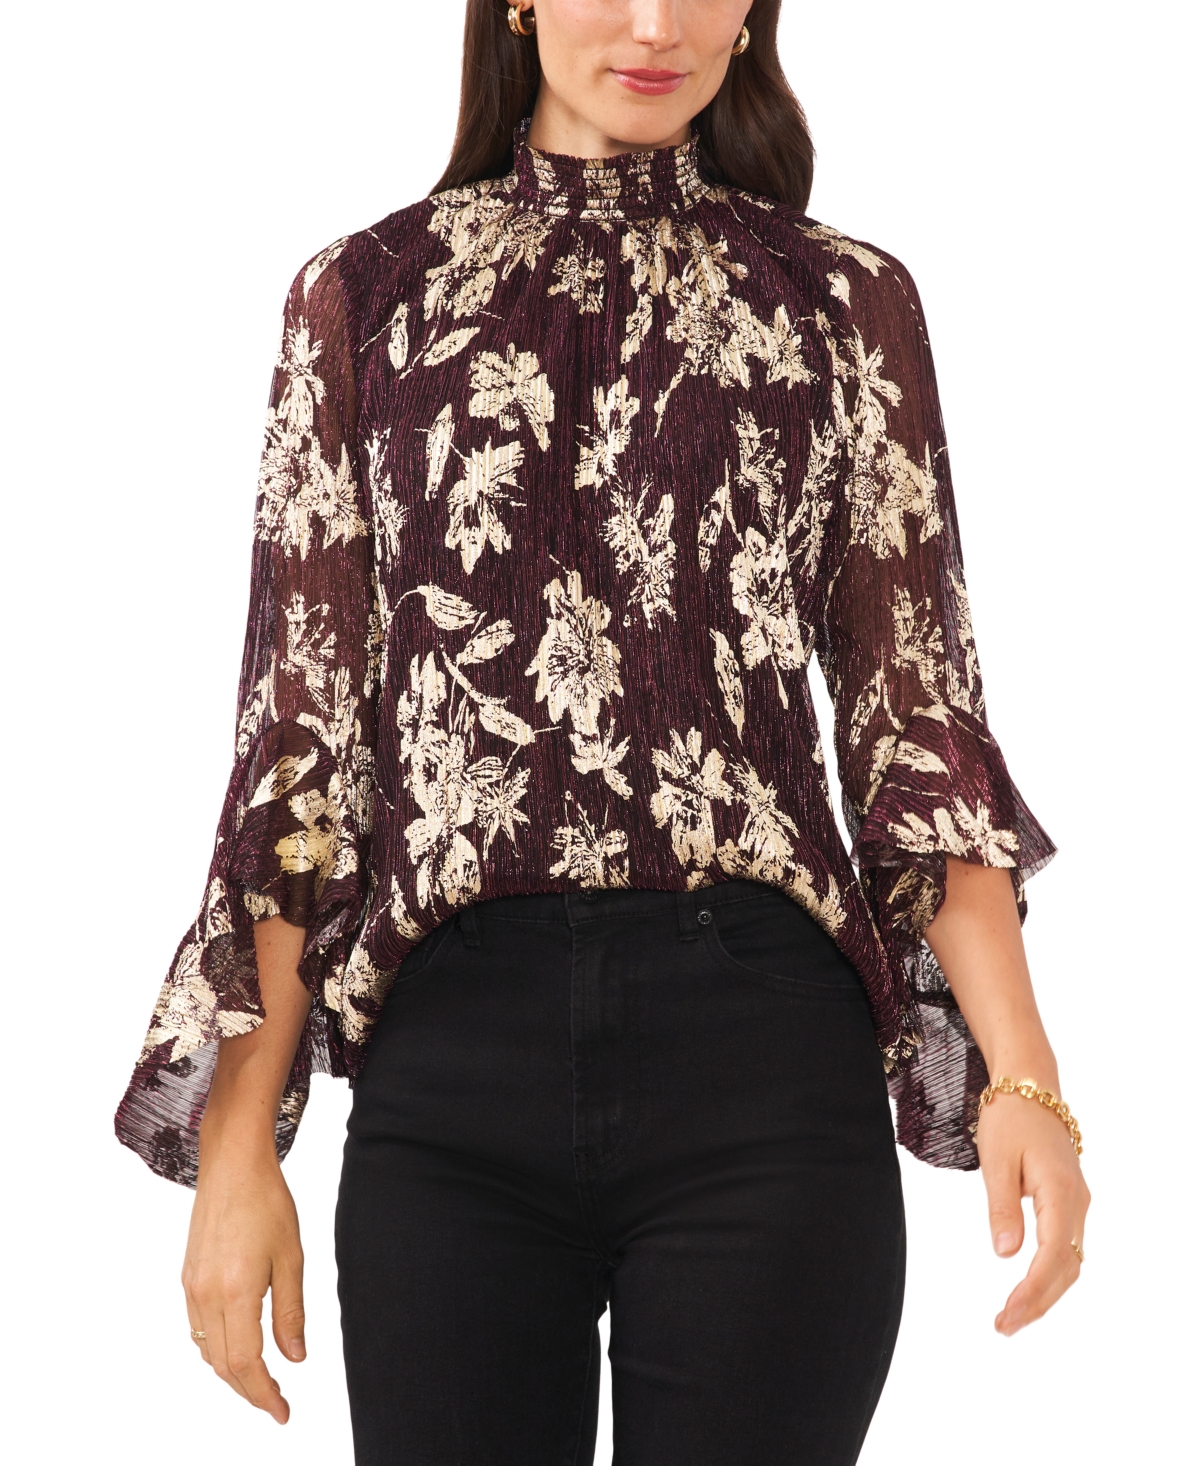 Vince Camuto Women's Floral-Print Bell-Sleeve Blouse